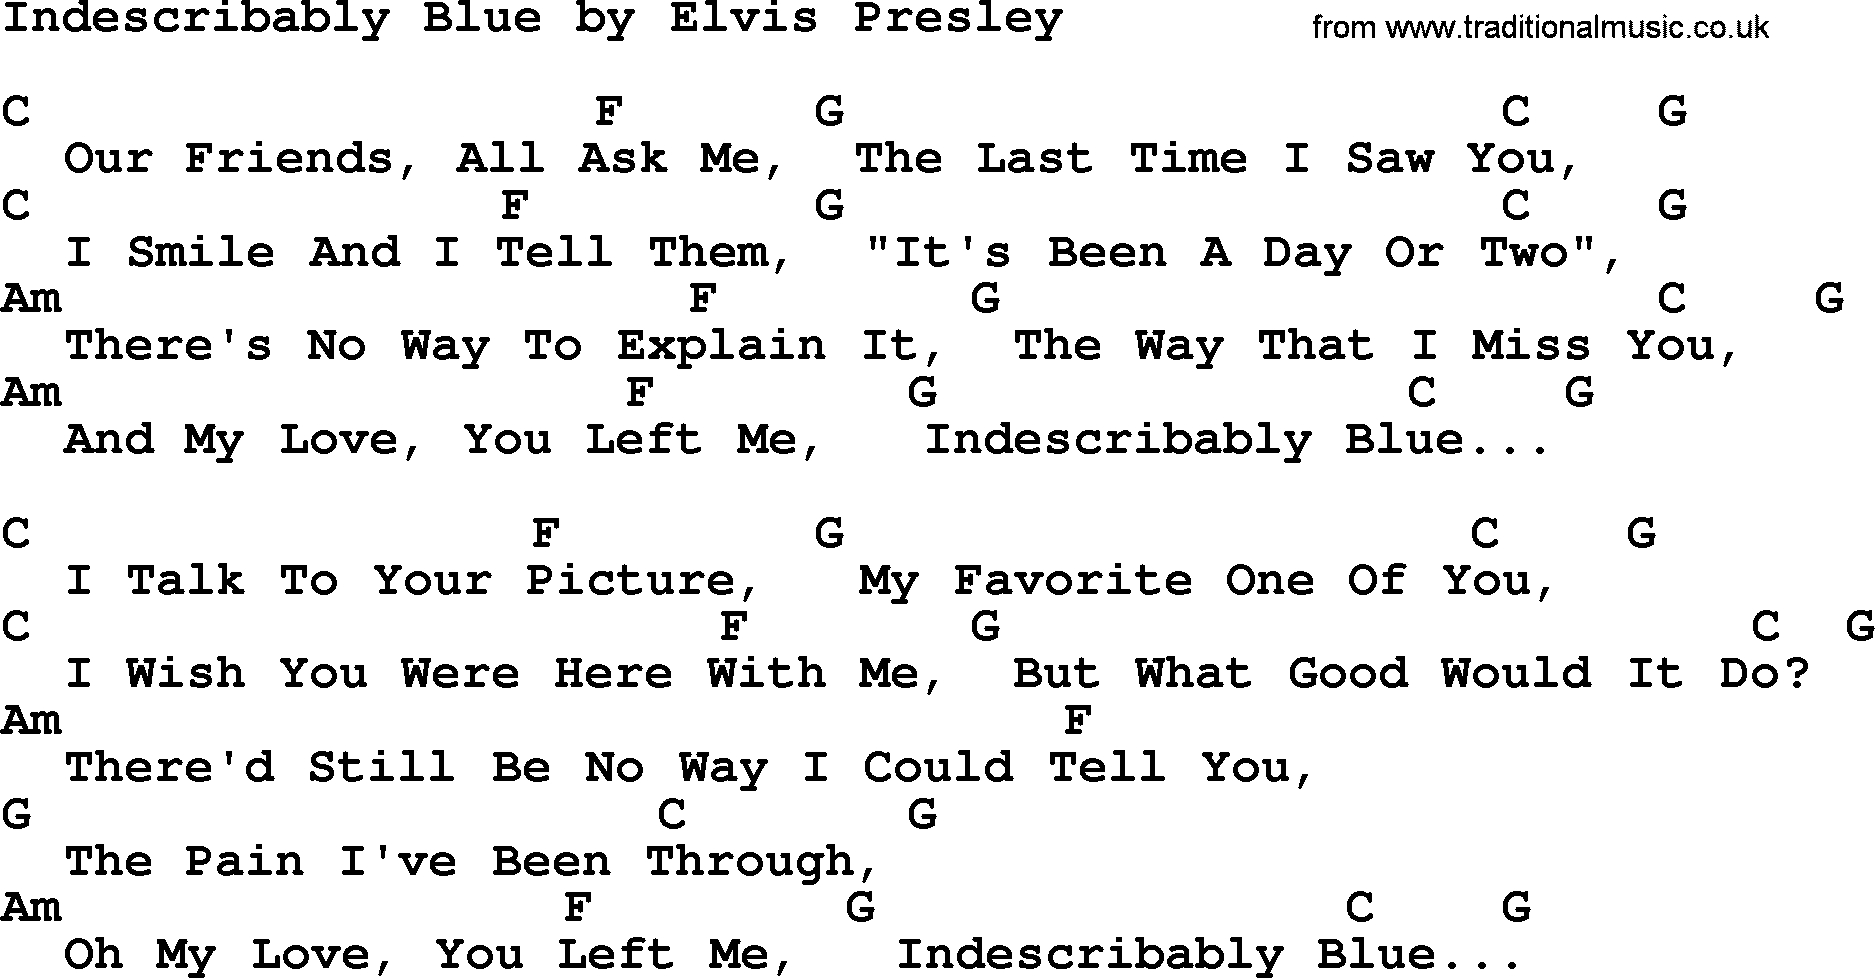 Elvis Presley song: Indescribably Blue, lyrics and chords